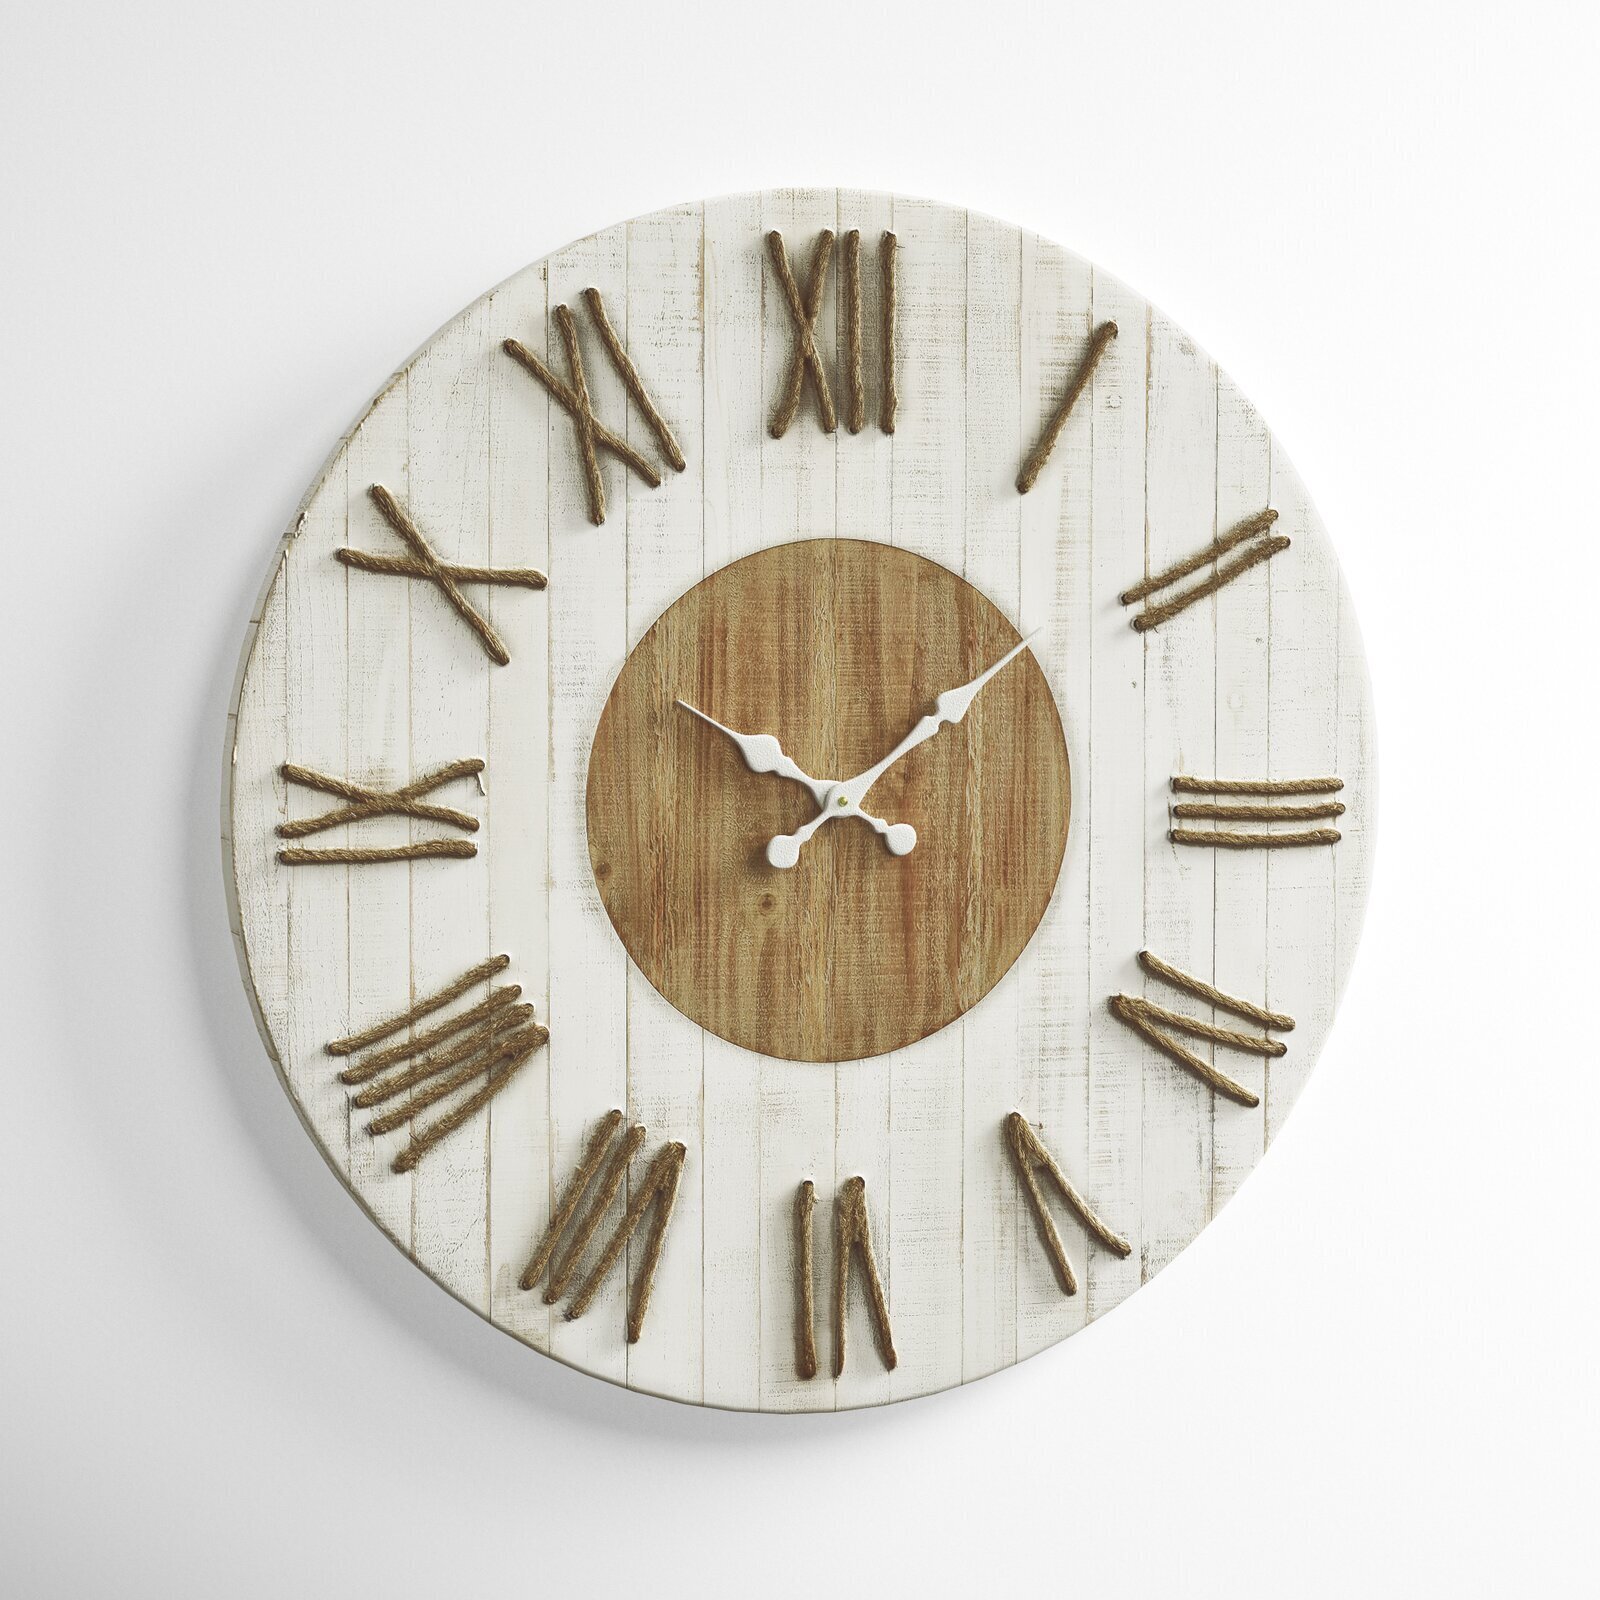 Rustic large vintage wall clock for sale